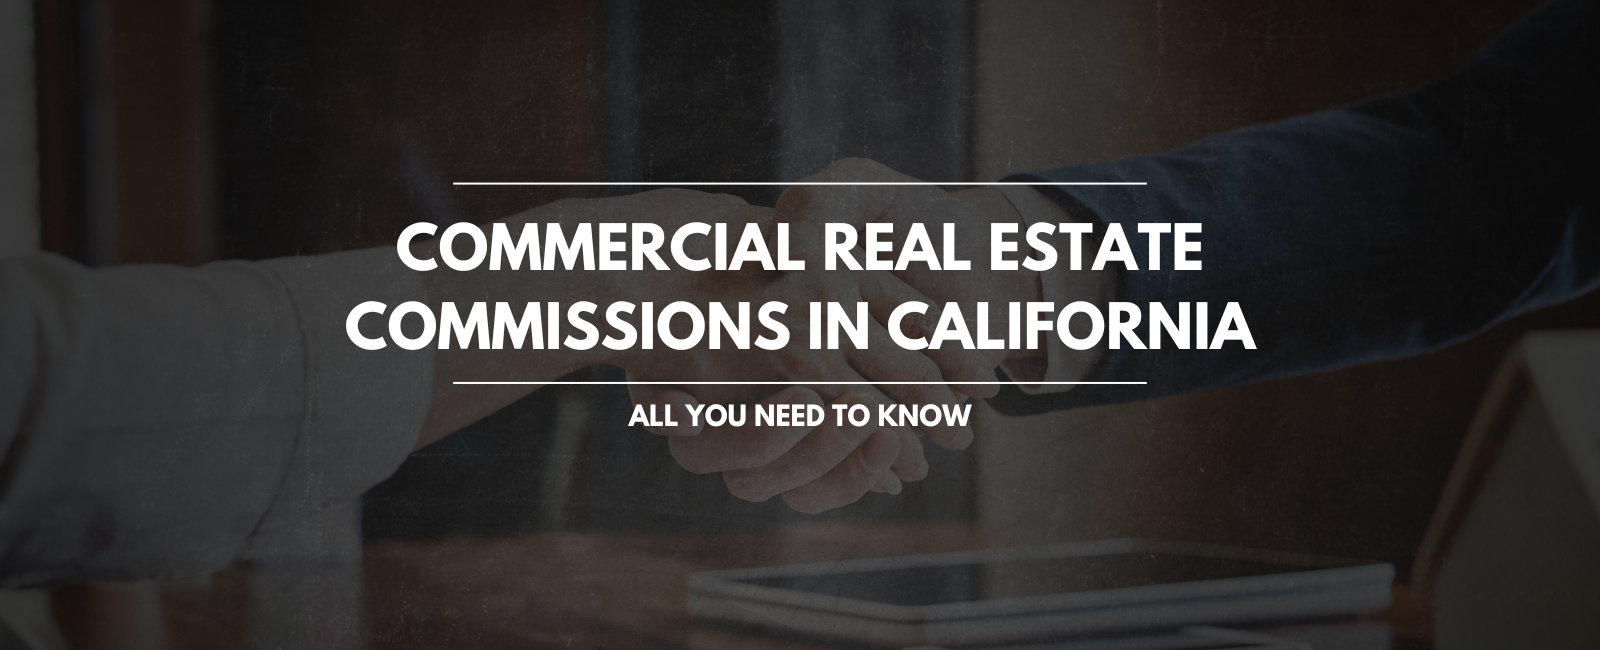 Two people shaking hands in the background, with text that reads "Commercial real estate commissions in California — all you need to know."